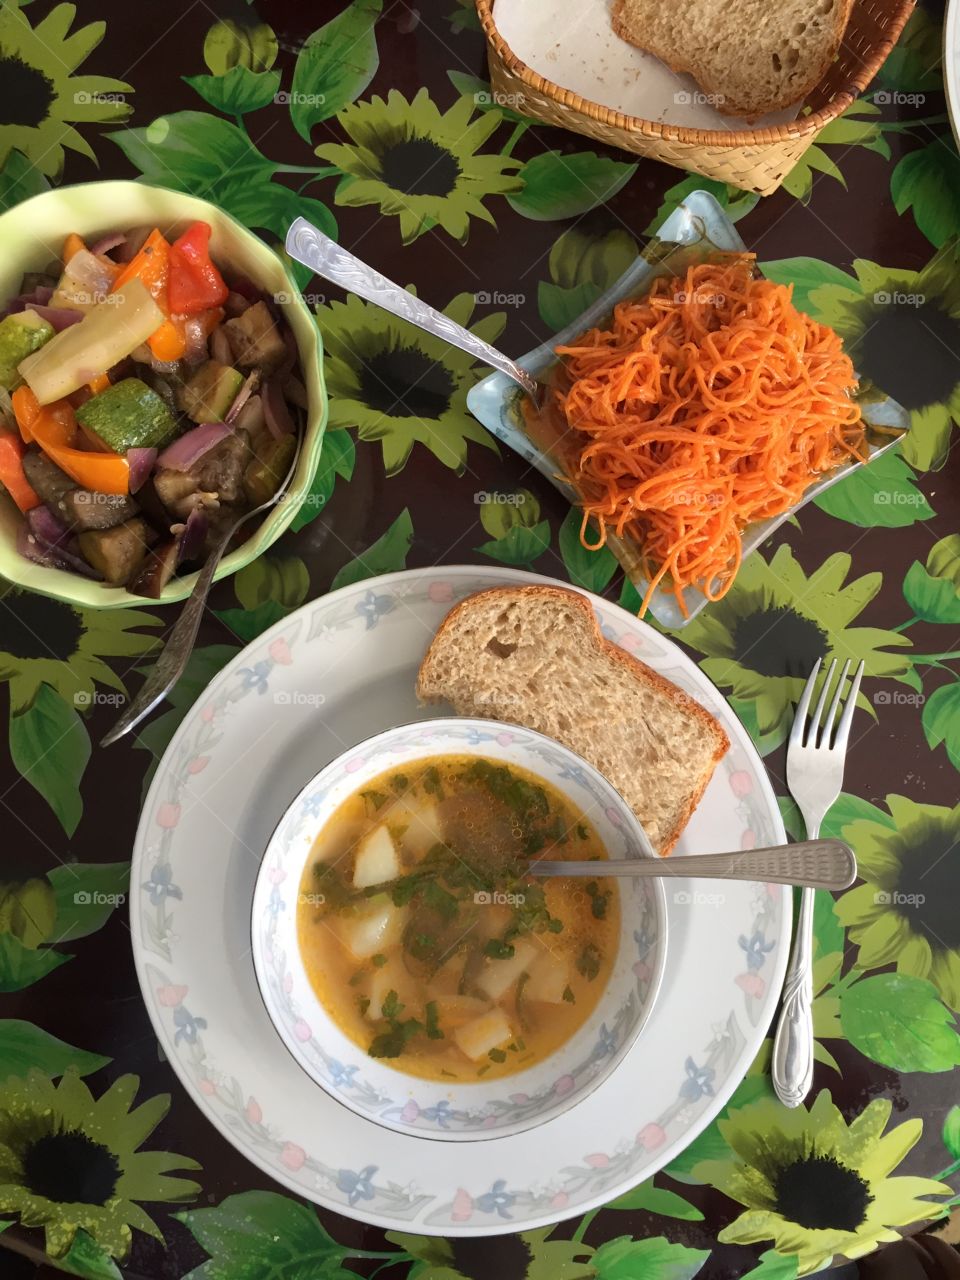 Soup and salad Moldovan style